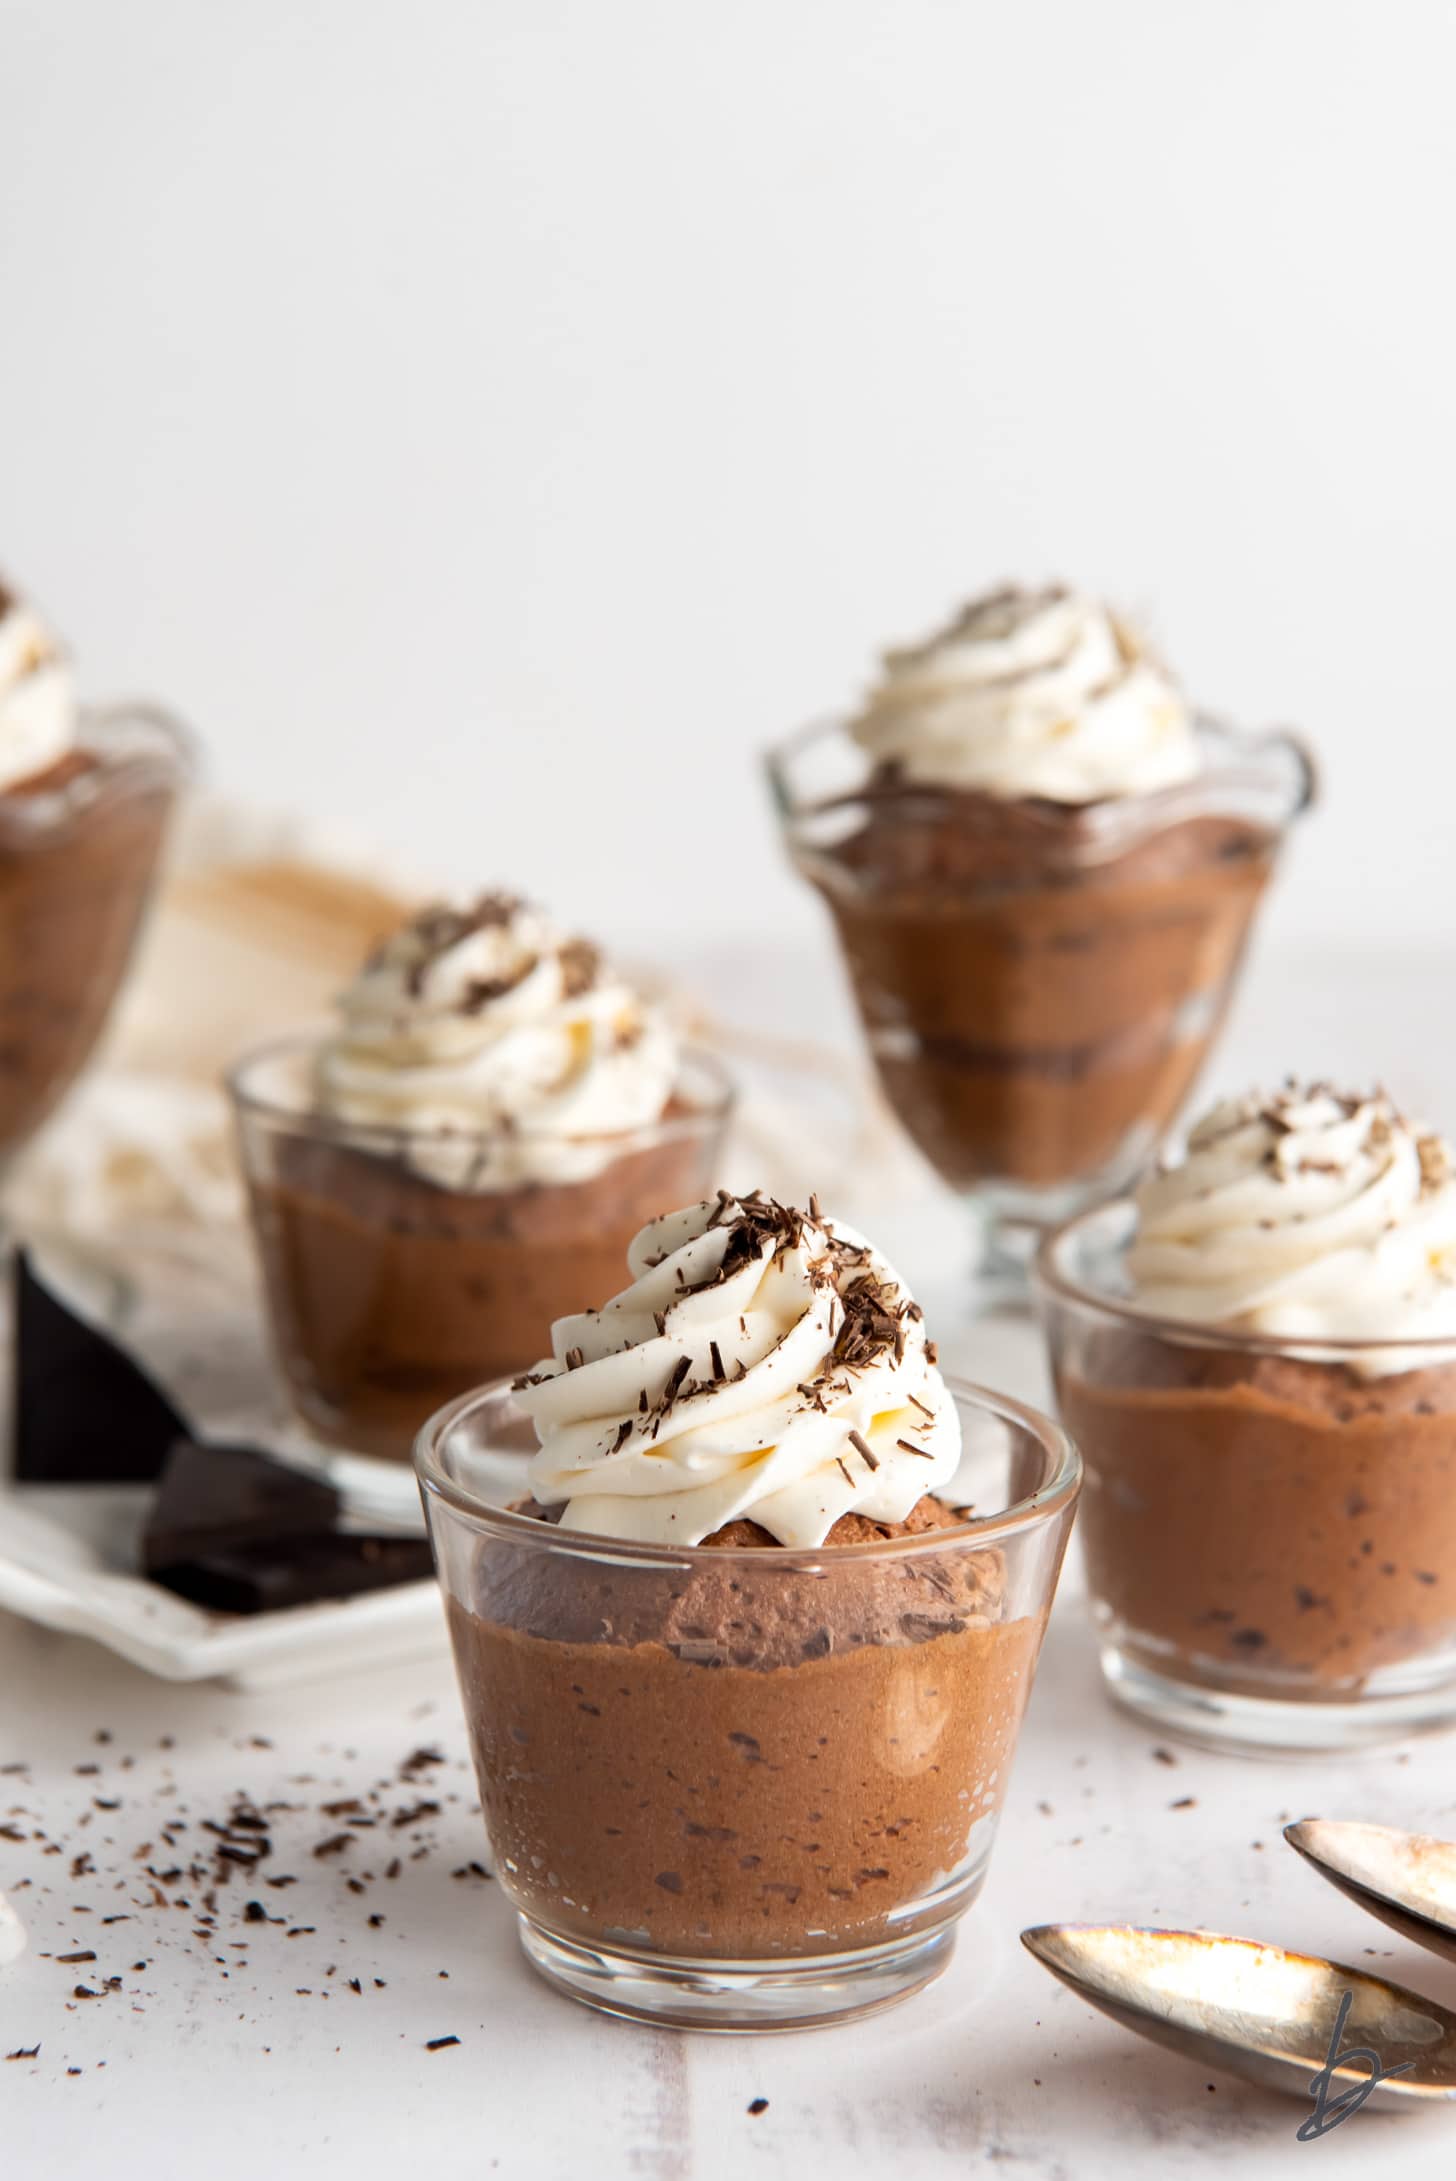 four glass jars topped with whipped cream and chocolate shavings